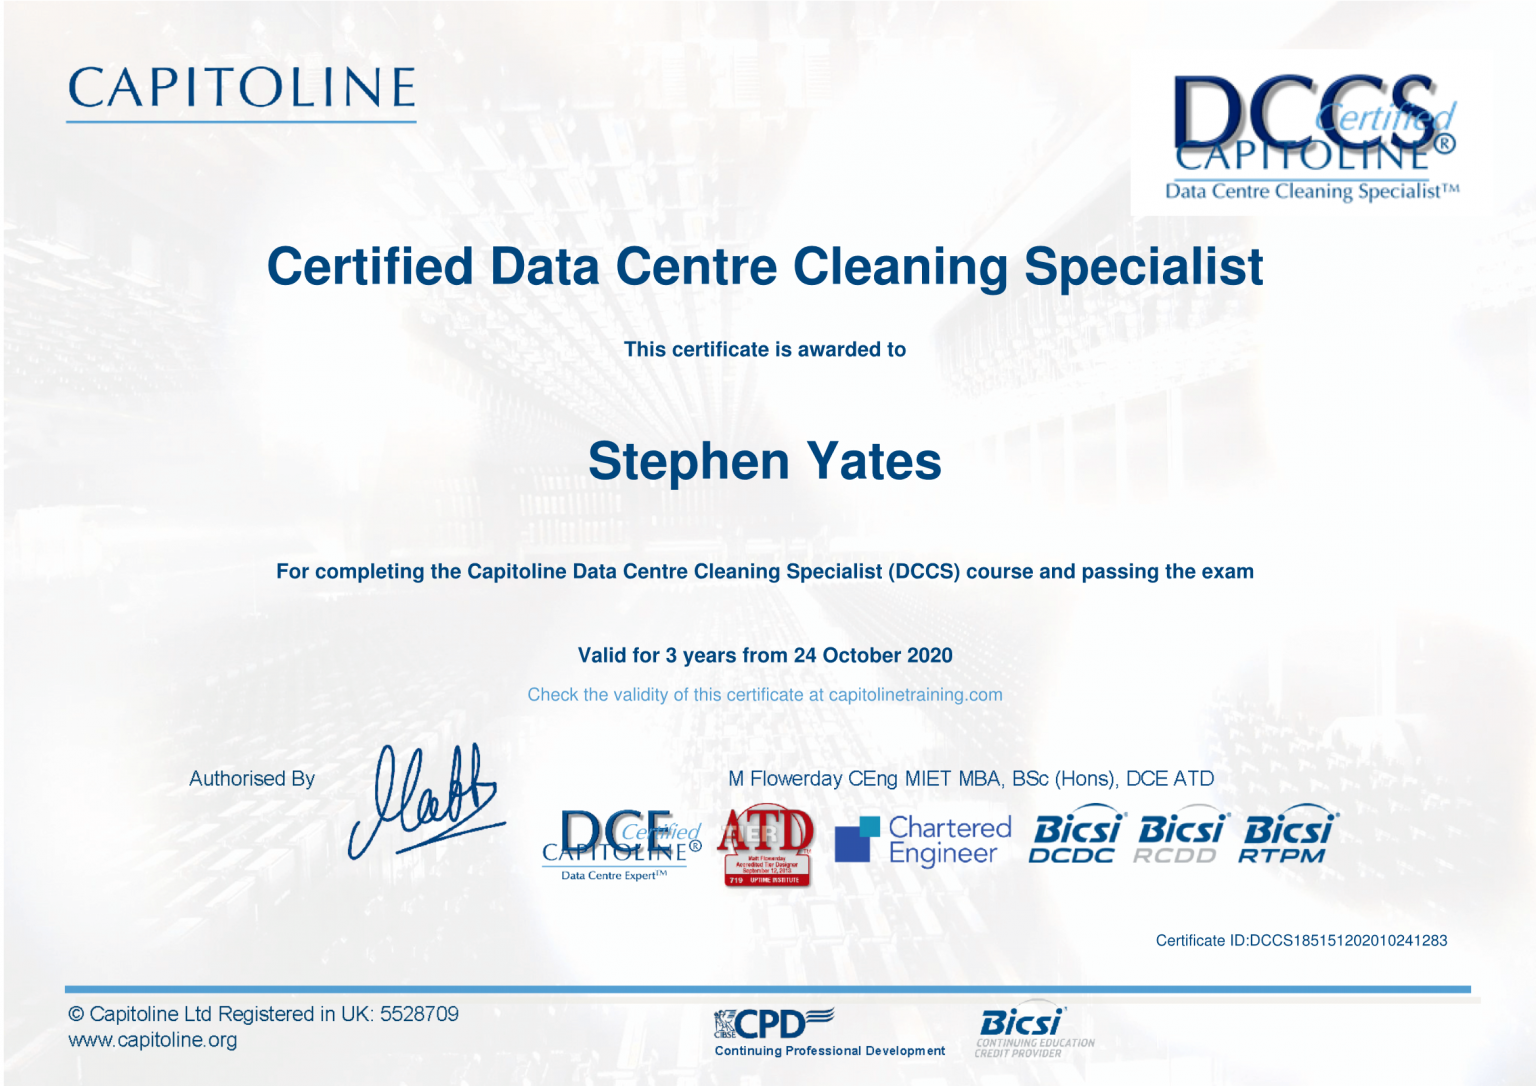 Data Centre Cleaning: Certified Data Centre Cleaning Specialist